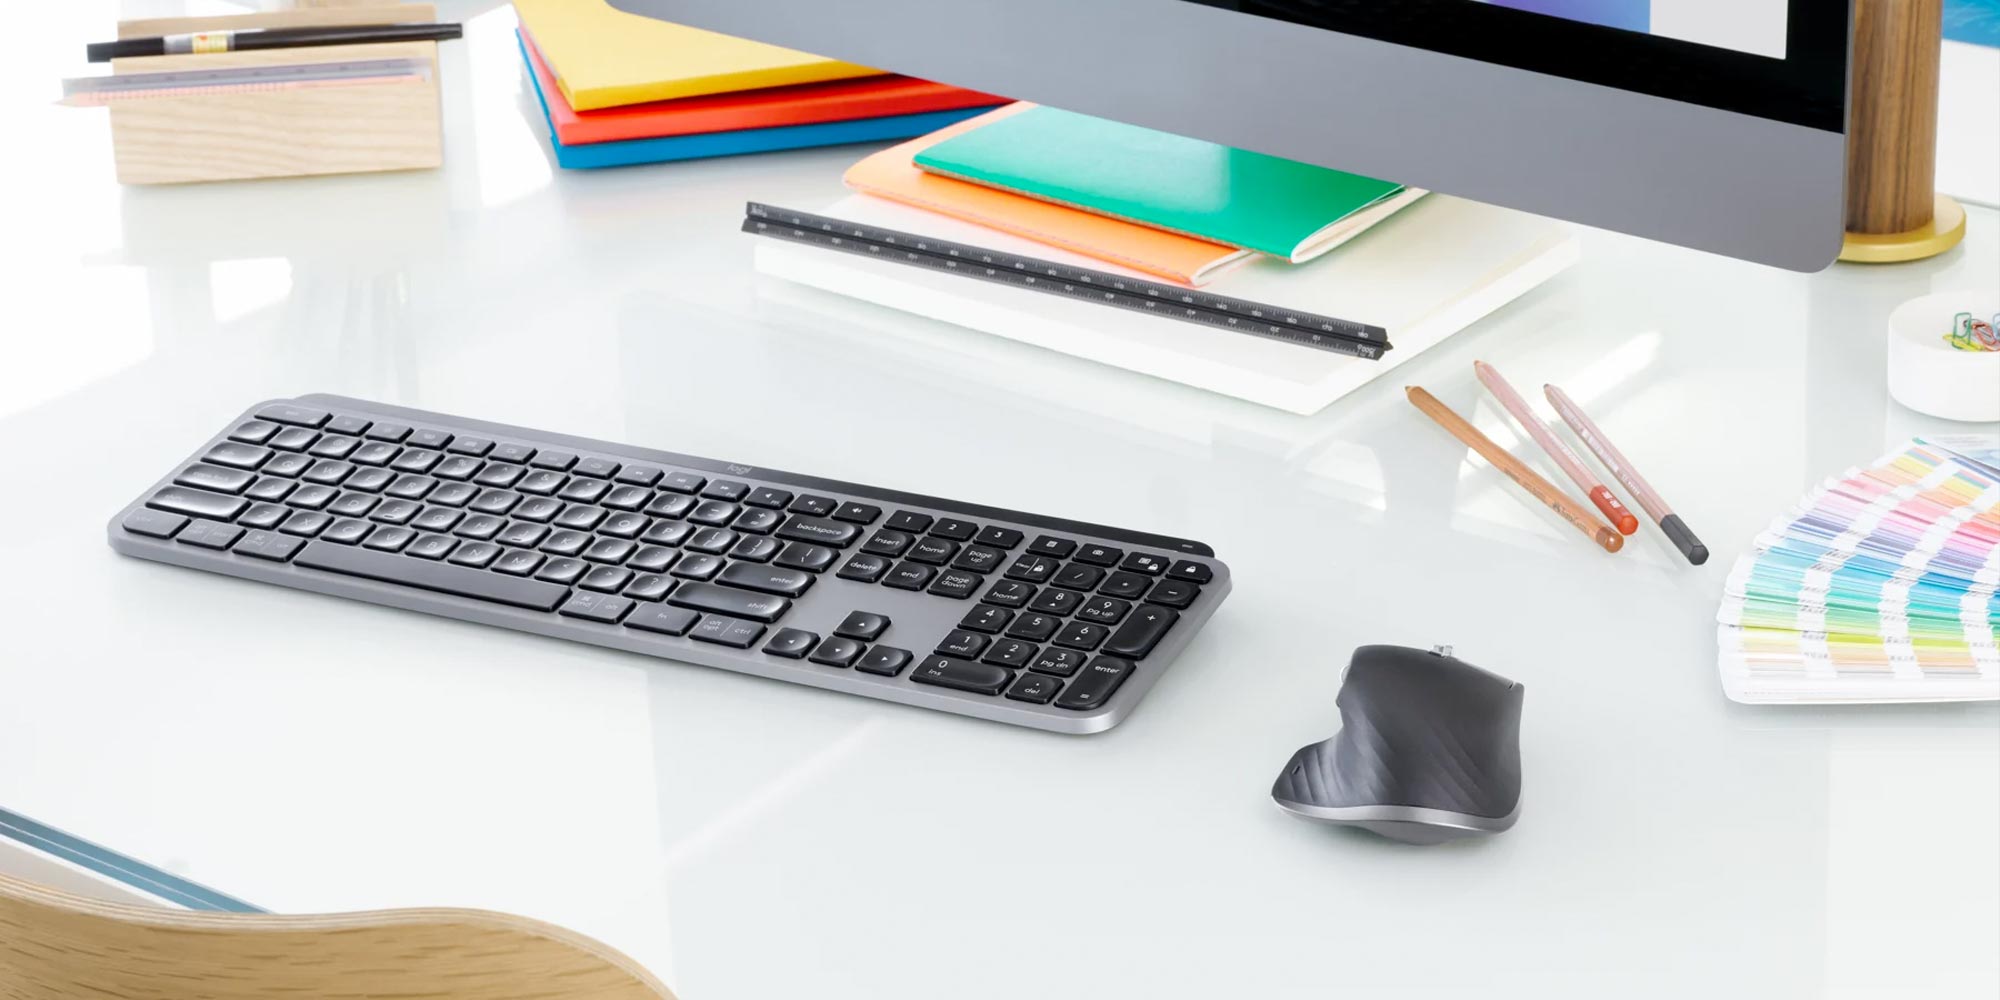 Logitech's MX Master 3 and MX upgrade your office setup at off, $80 each